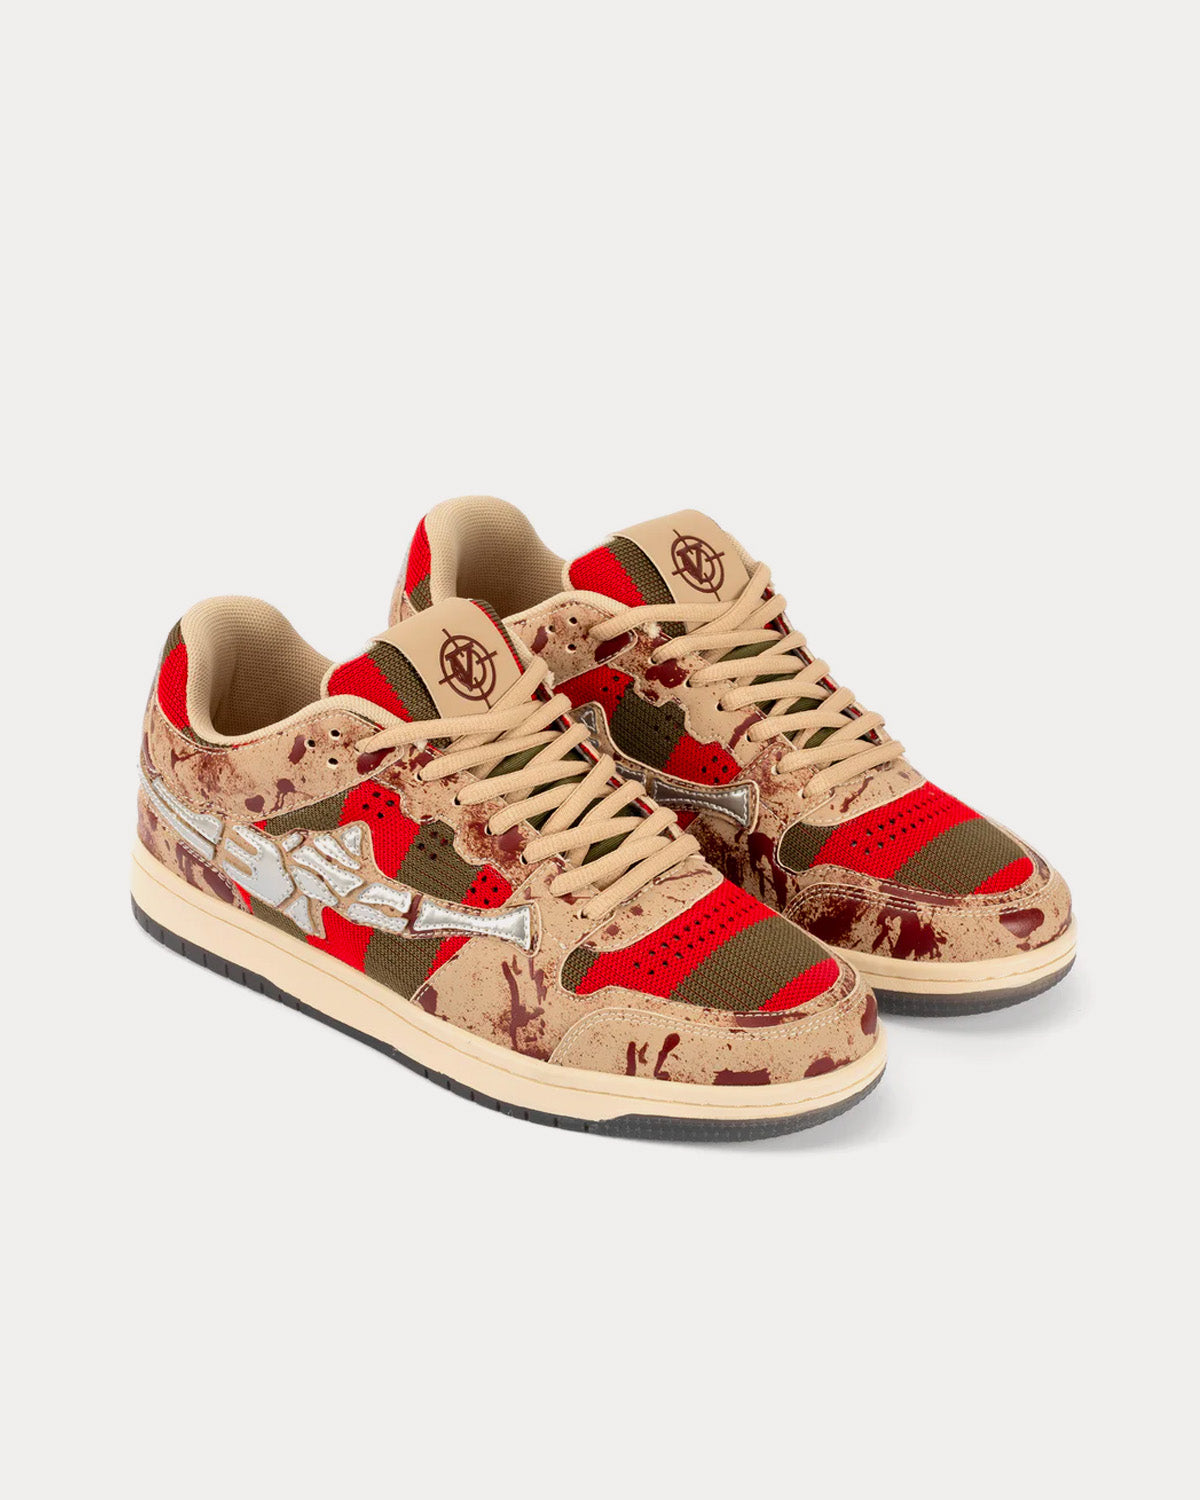 Vicinity - Akimbo Lows 'Bloody Low' Low Top Sneakers